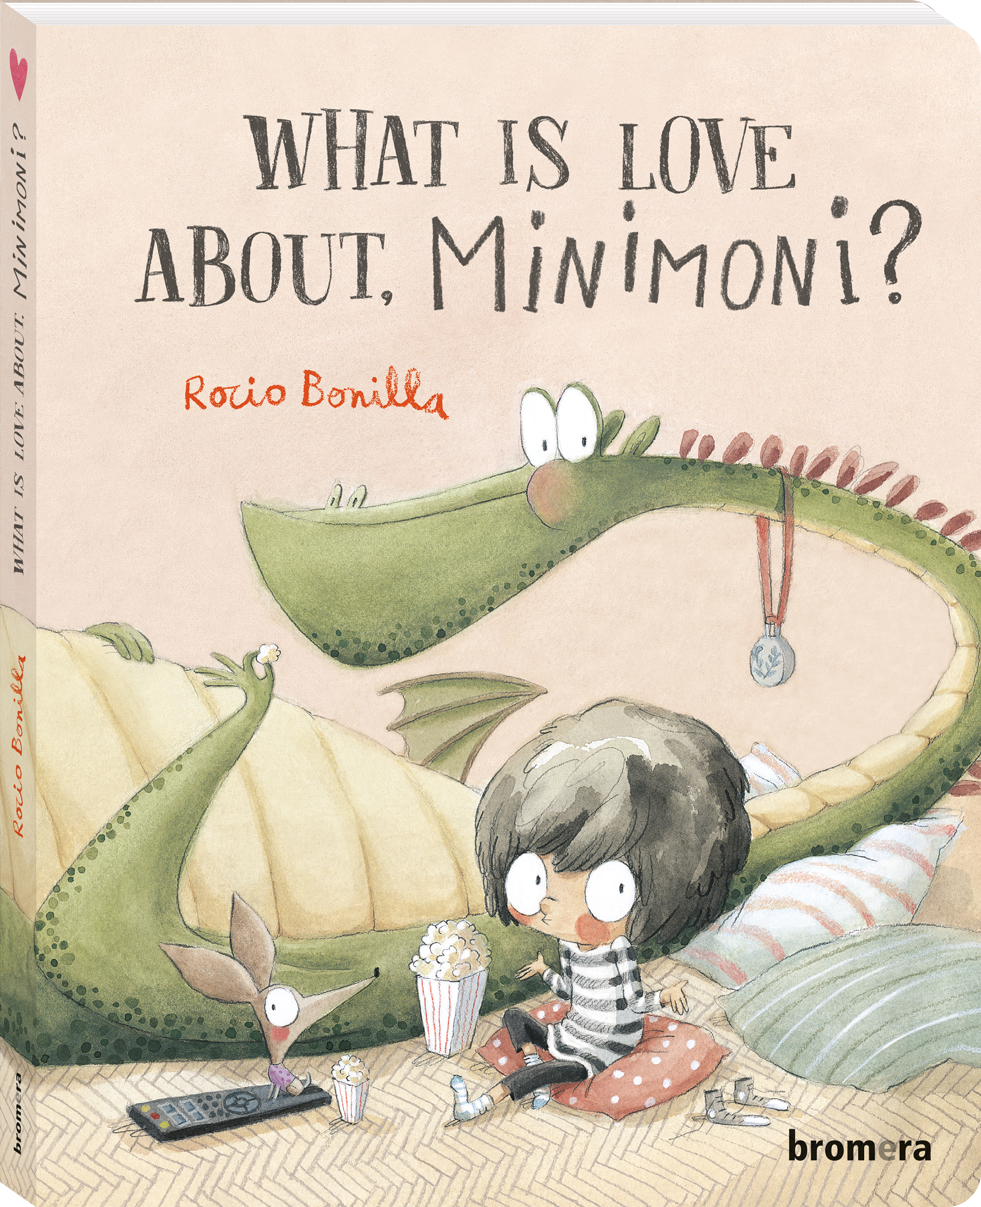 What is love about, Minimoni?